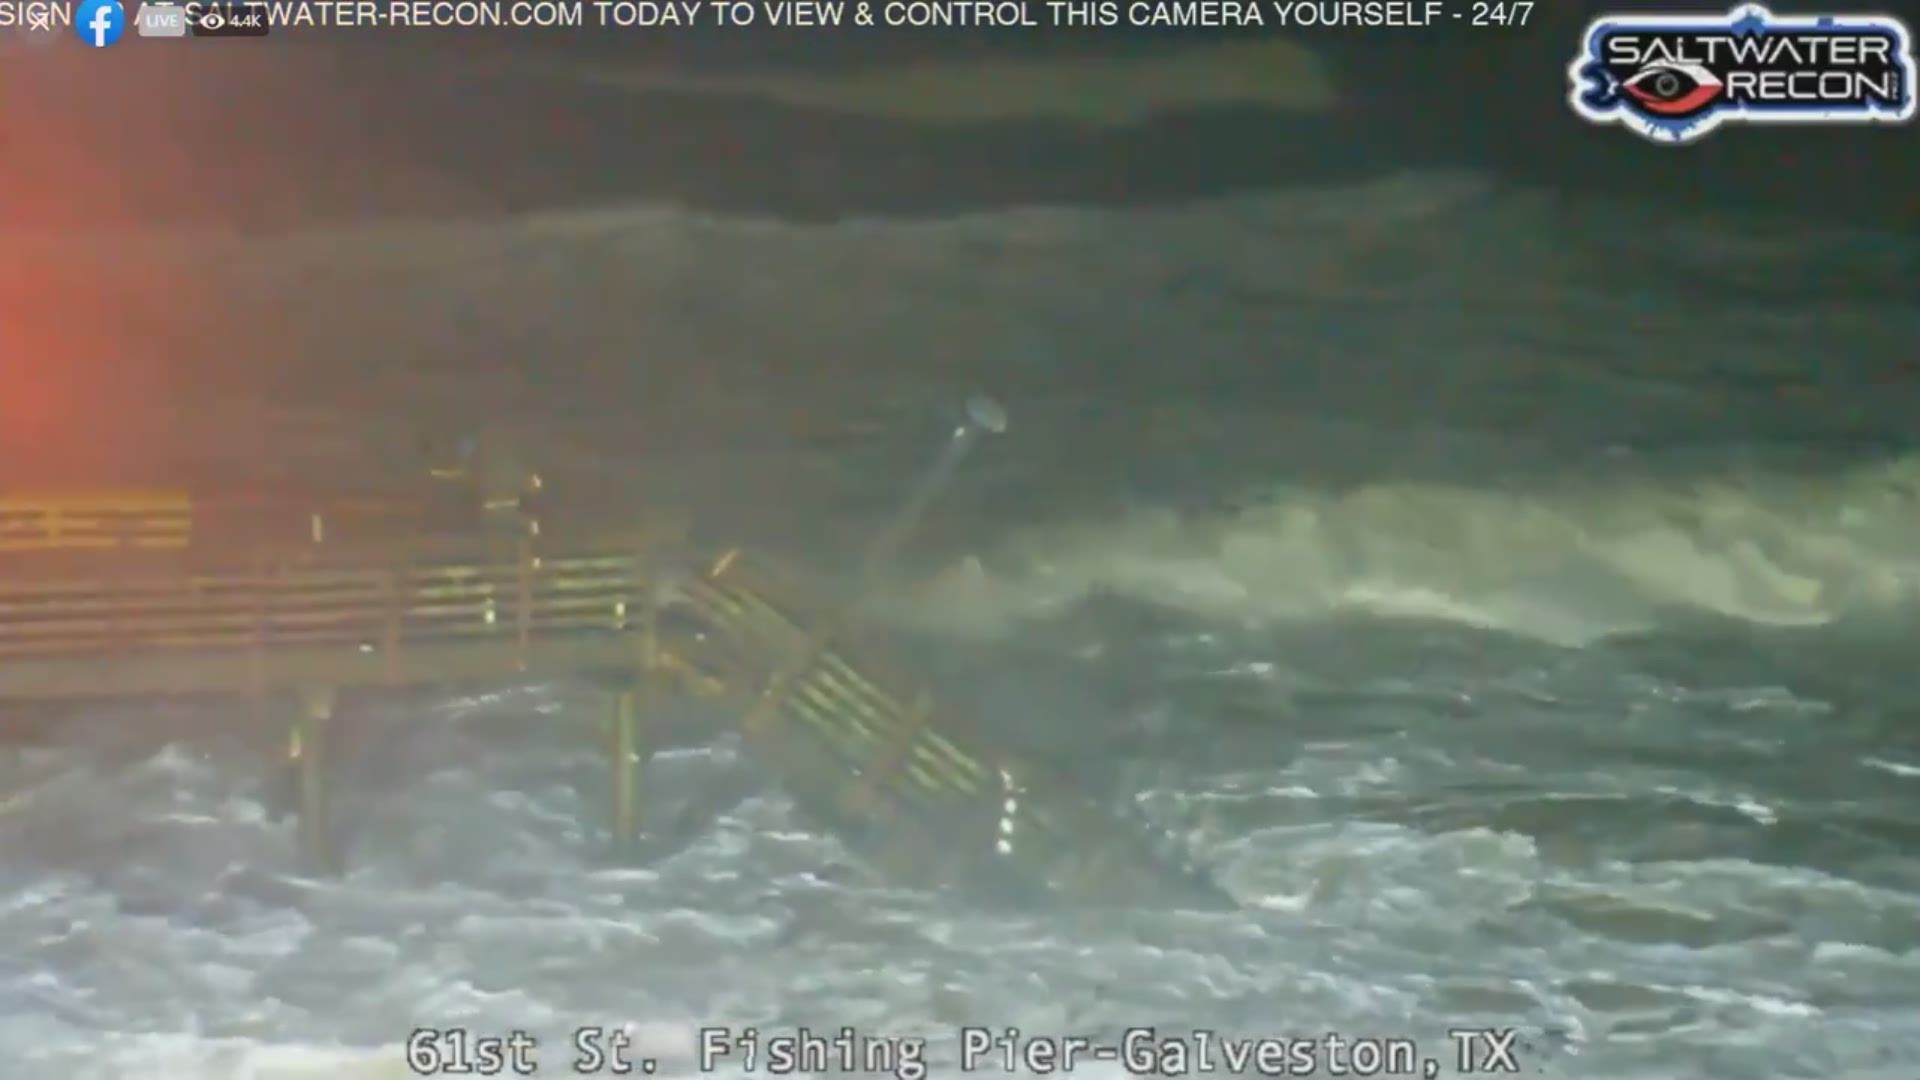 Rough surf from Tropical Storm Beta is threatened the end of the 61st Street pier. This video is shared from http://Saltwater-recon.com.